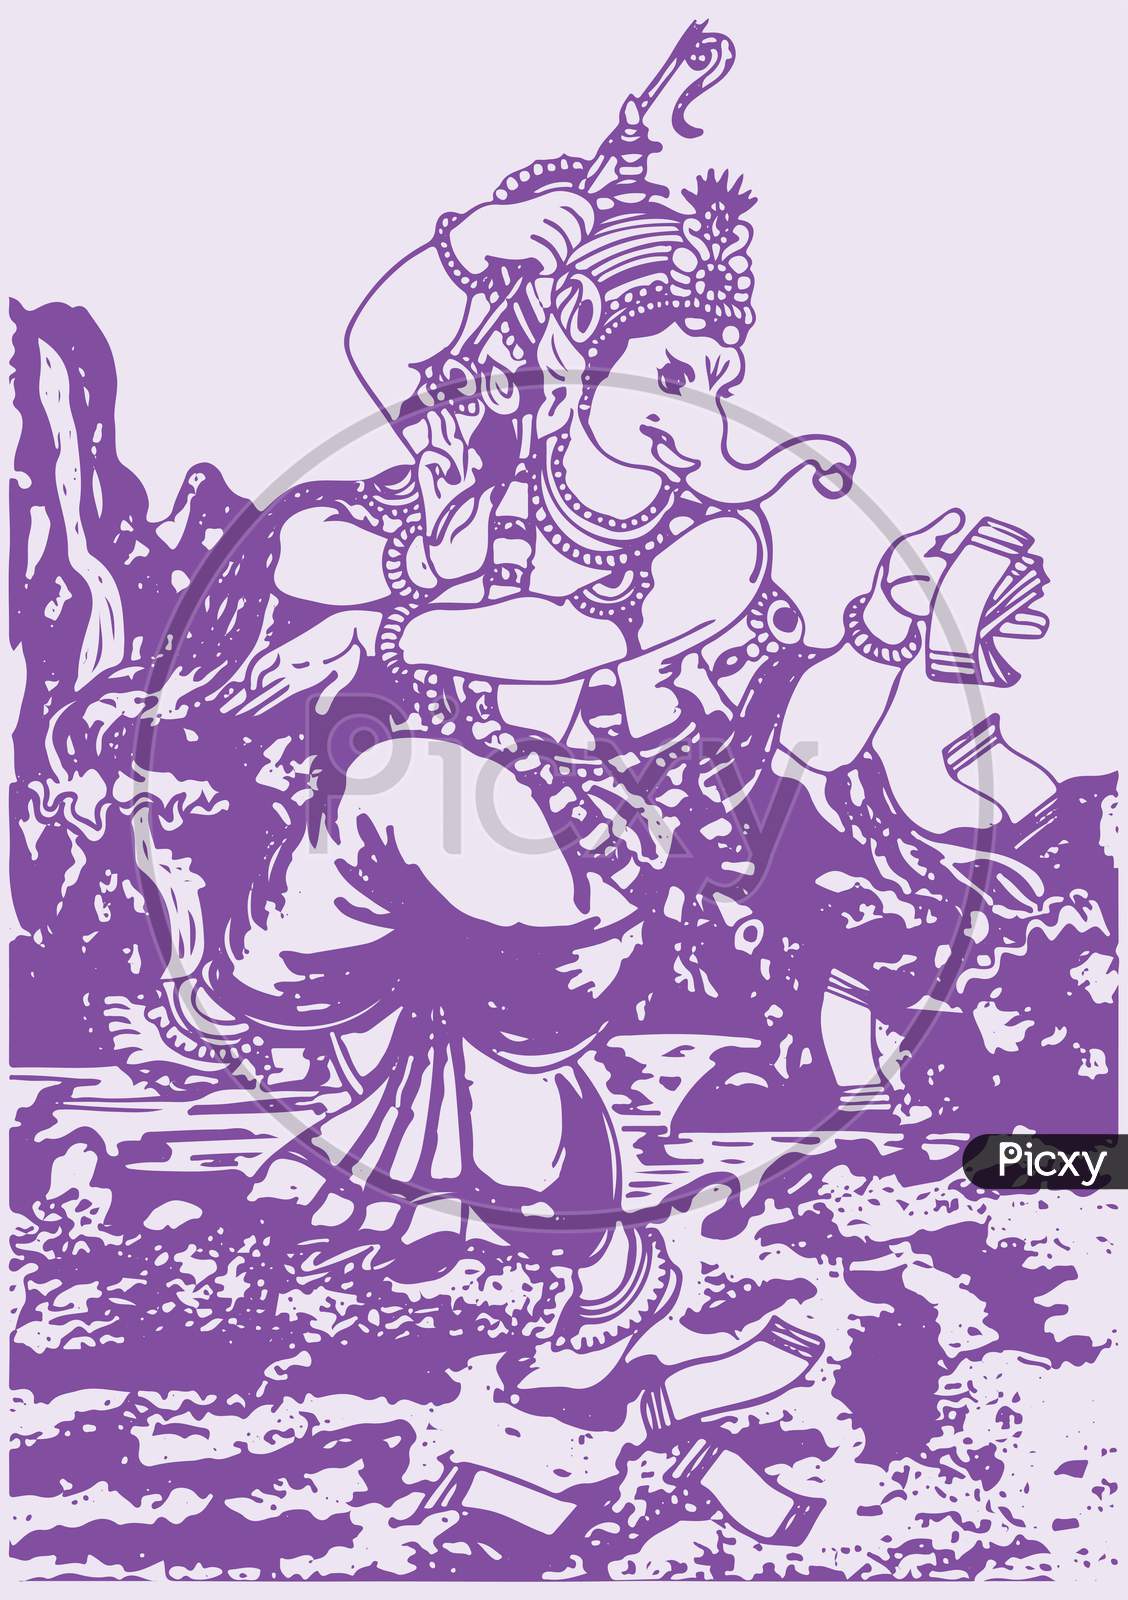 Sketch of Lord Ganesha silhouette and outline editable illustration